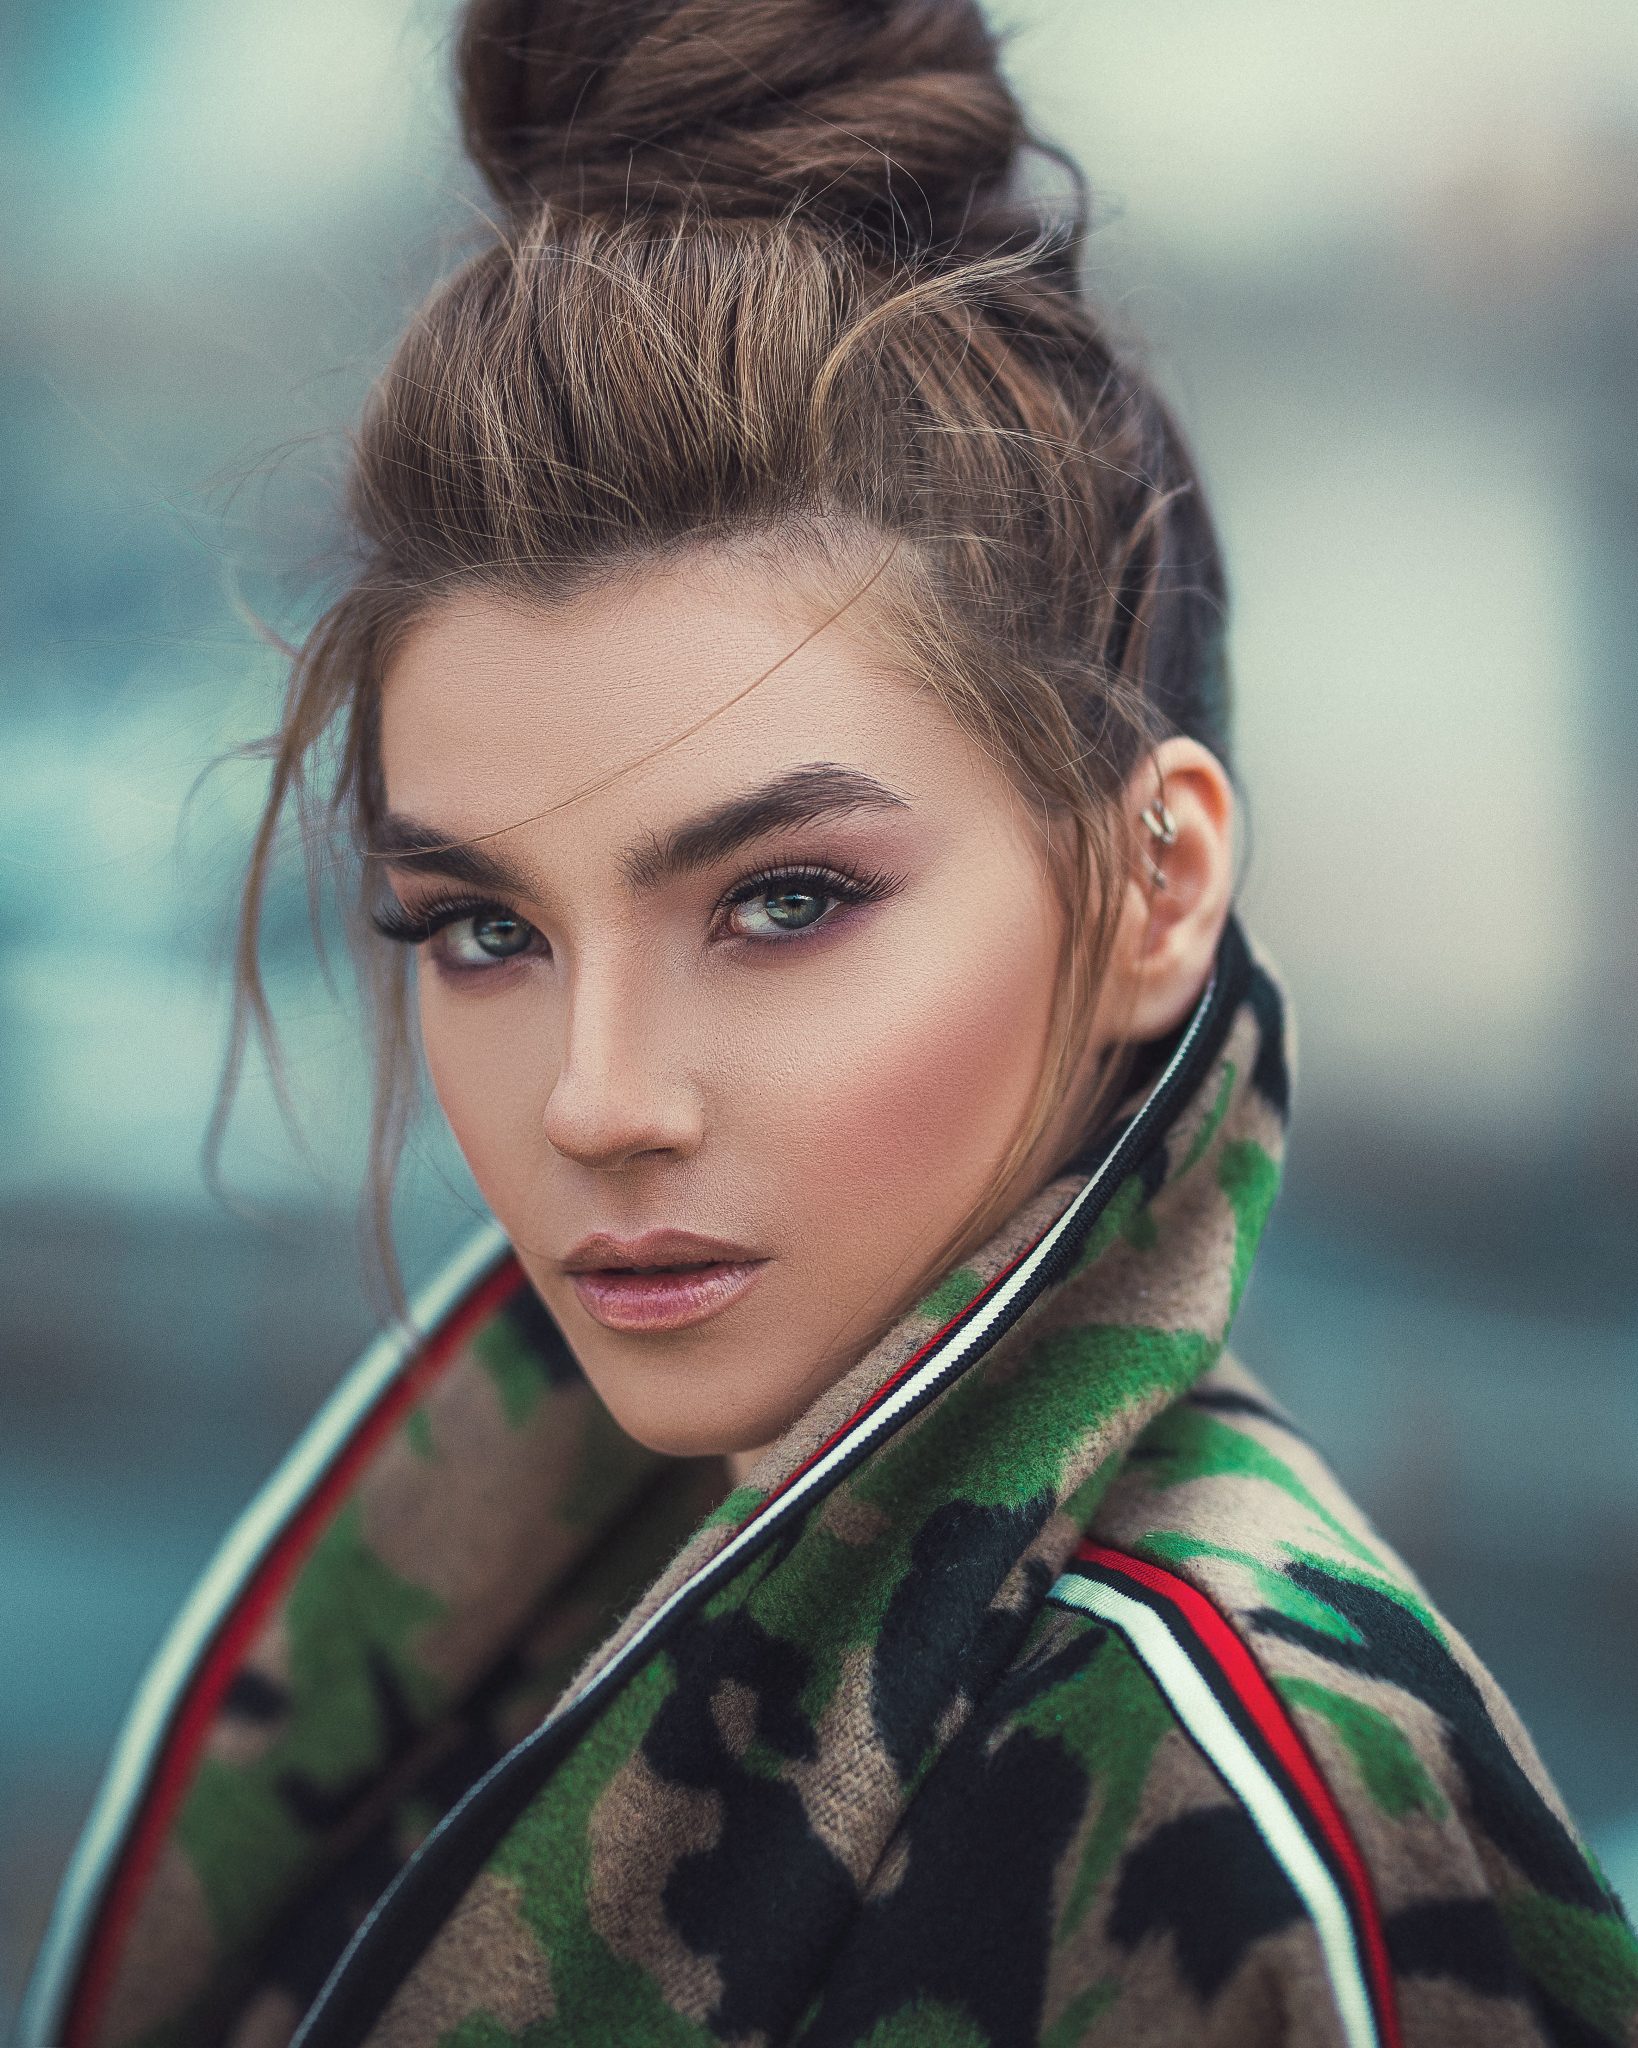 Woman wearing a green jacket has a beautiful make up using the best drugstore toners